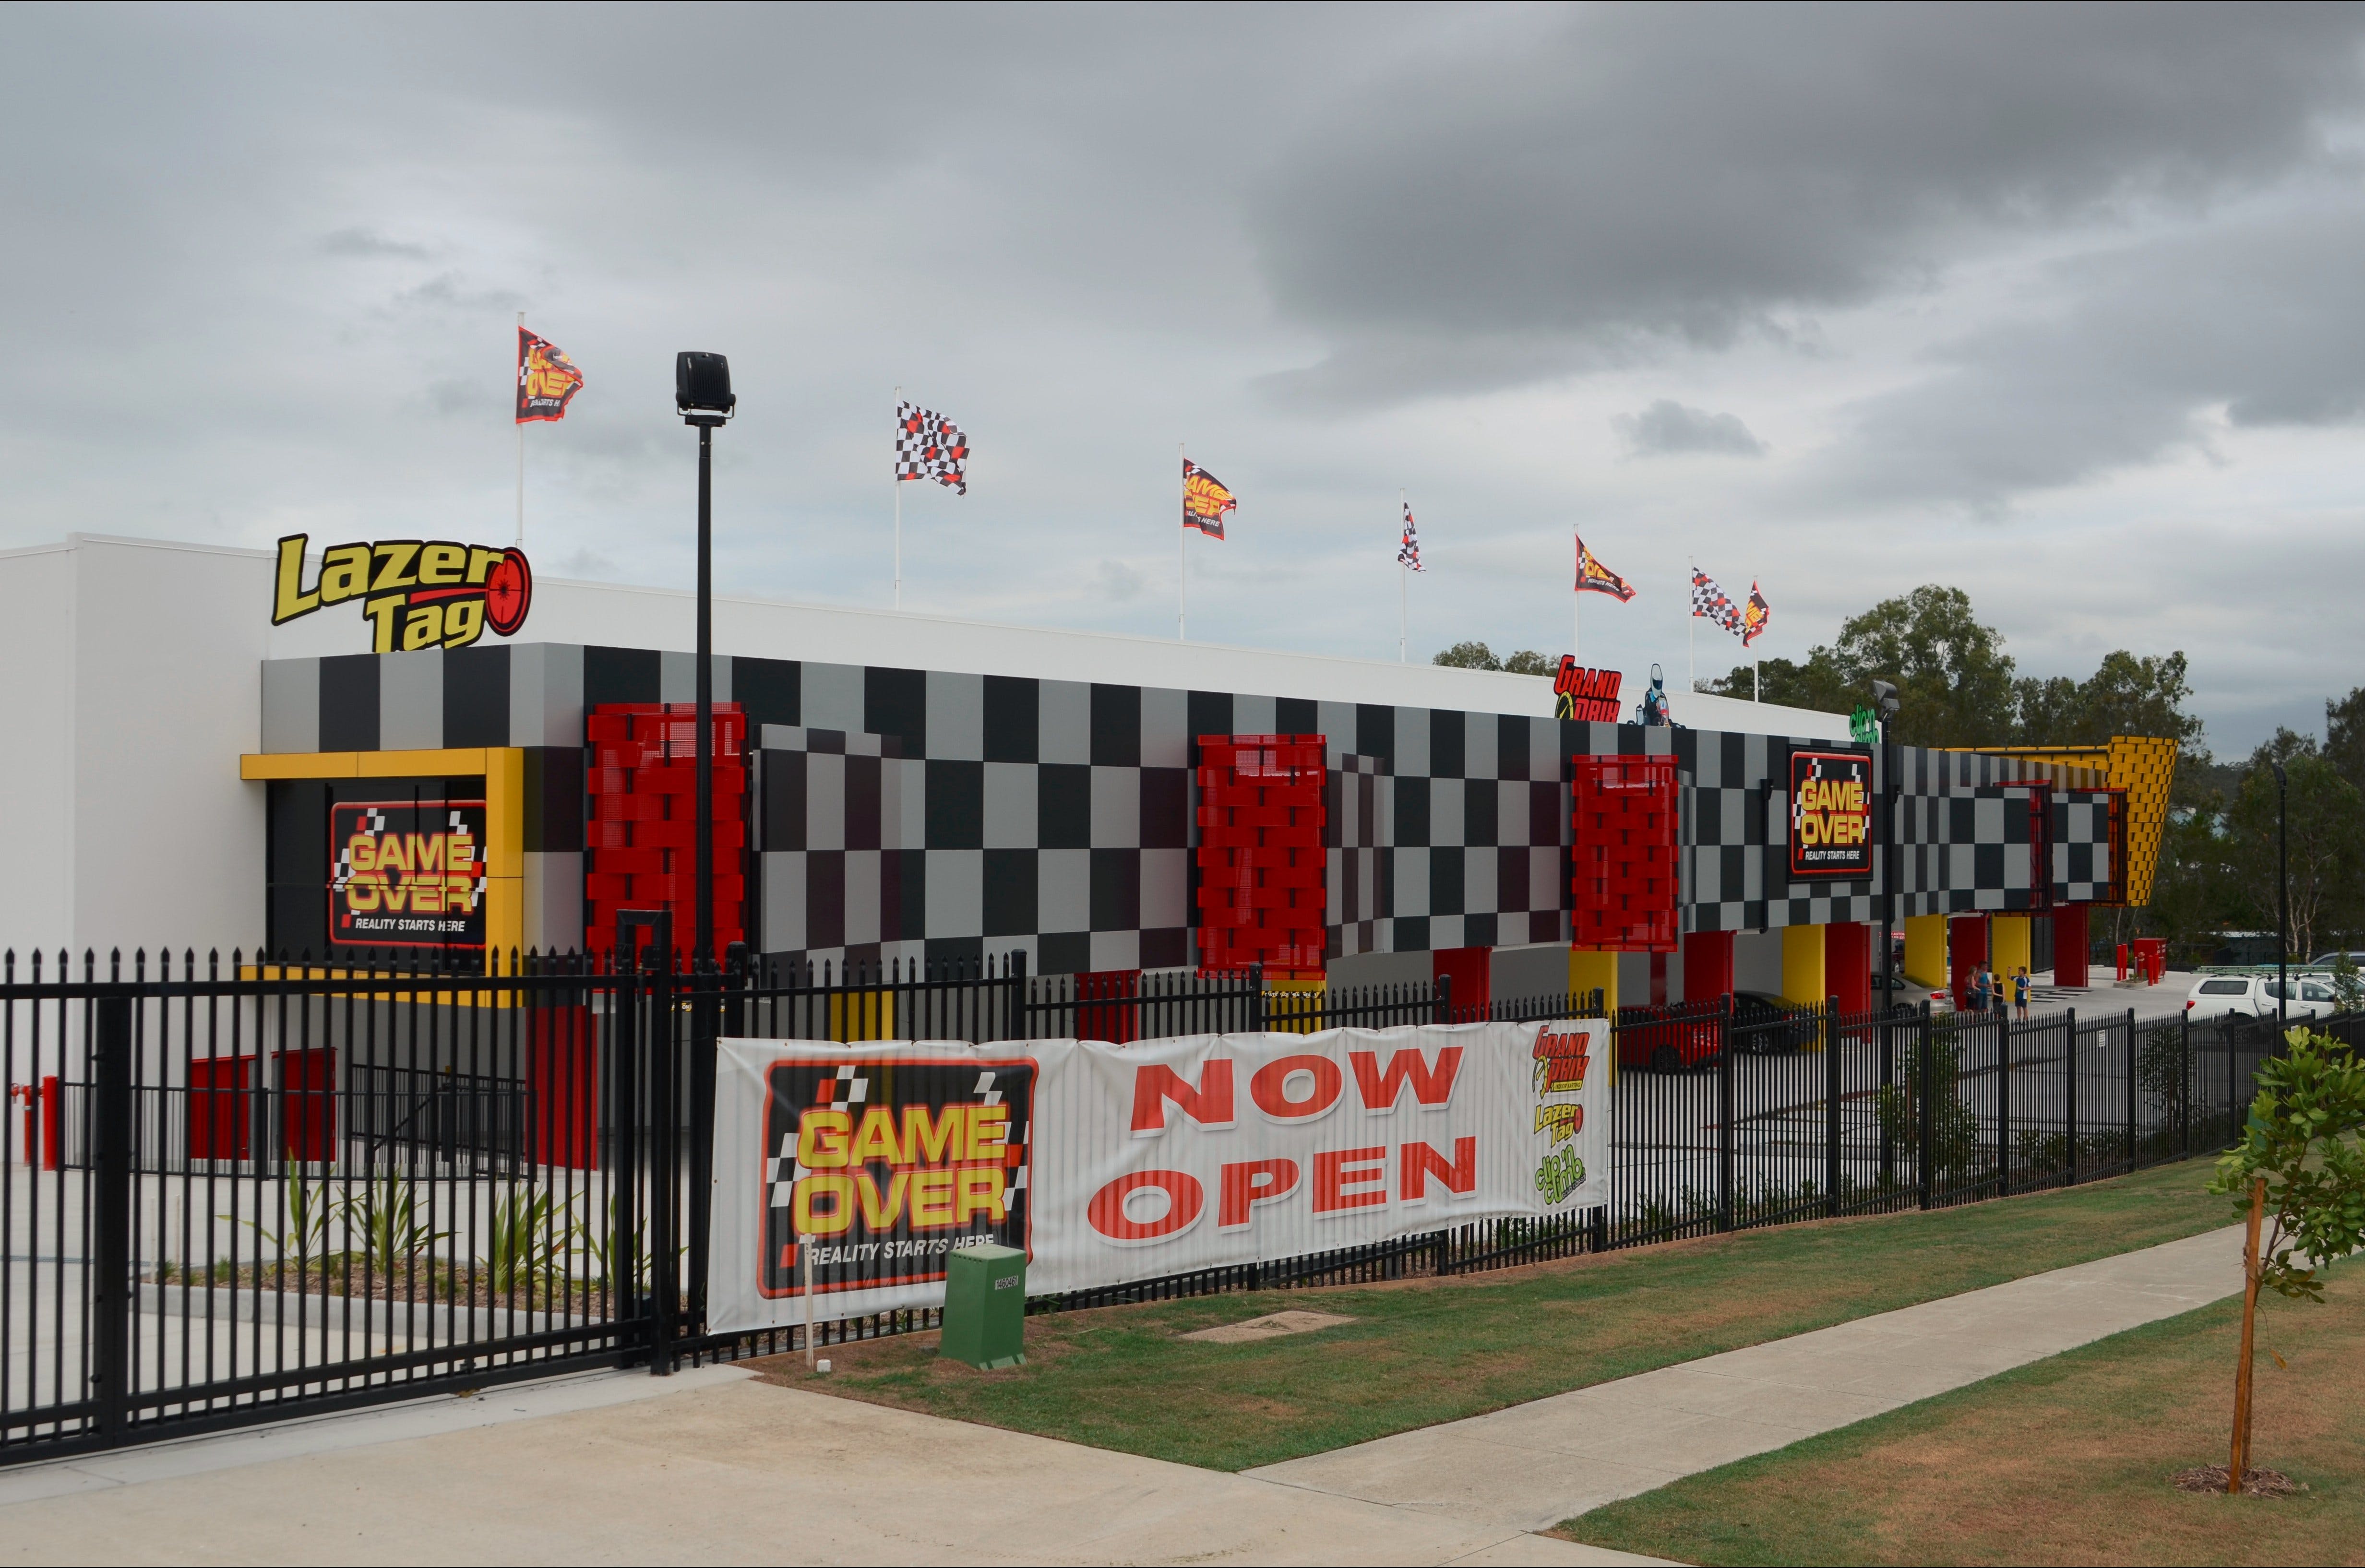 Game Over Indoor Go Karting Adventure Climbing Walls and Lazer Tag Centre - Find Attractions